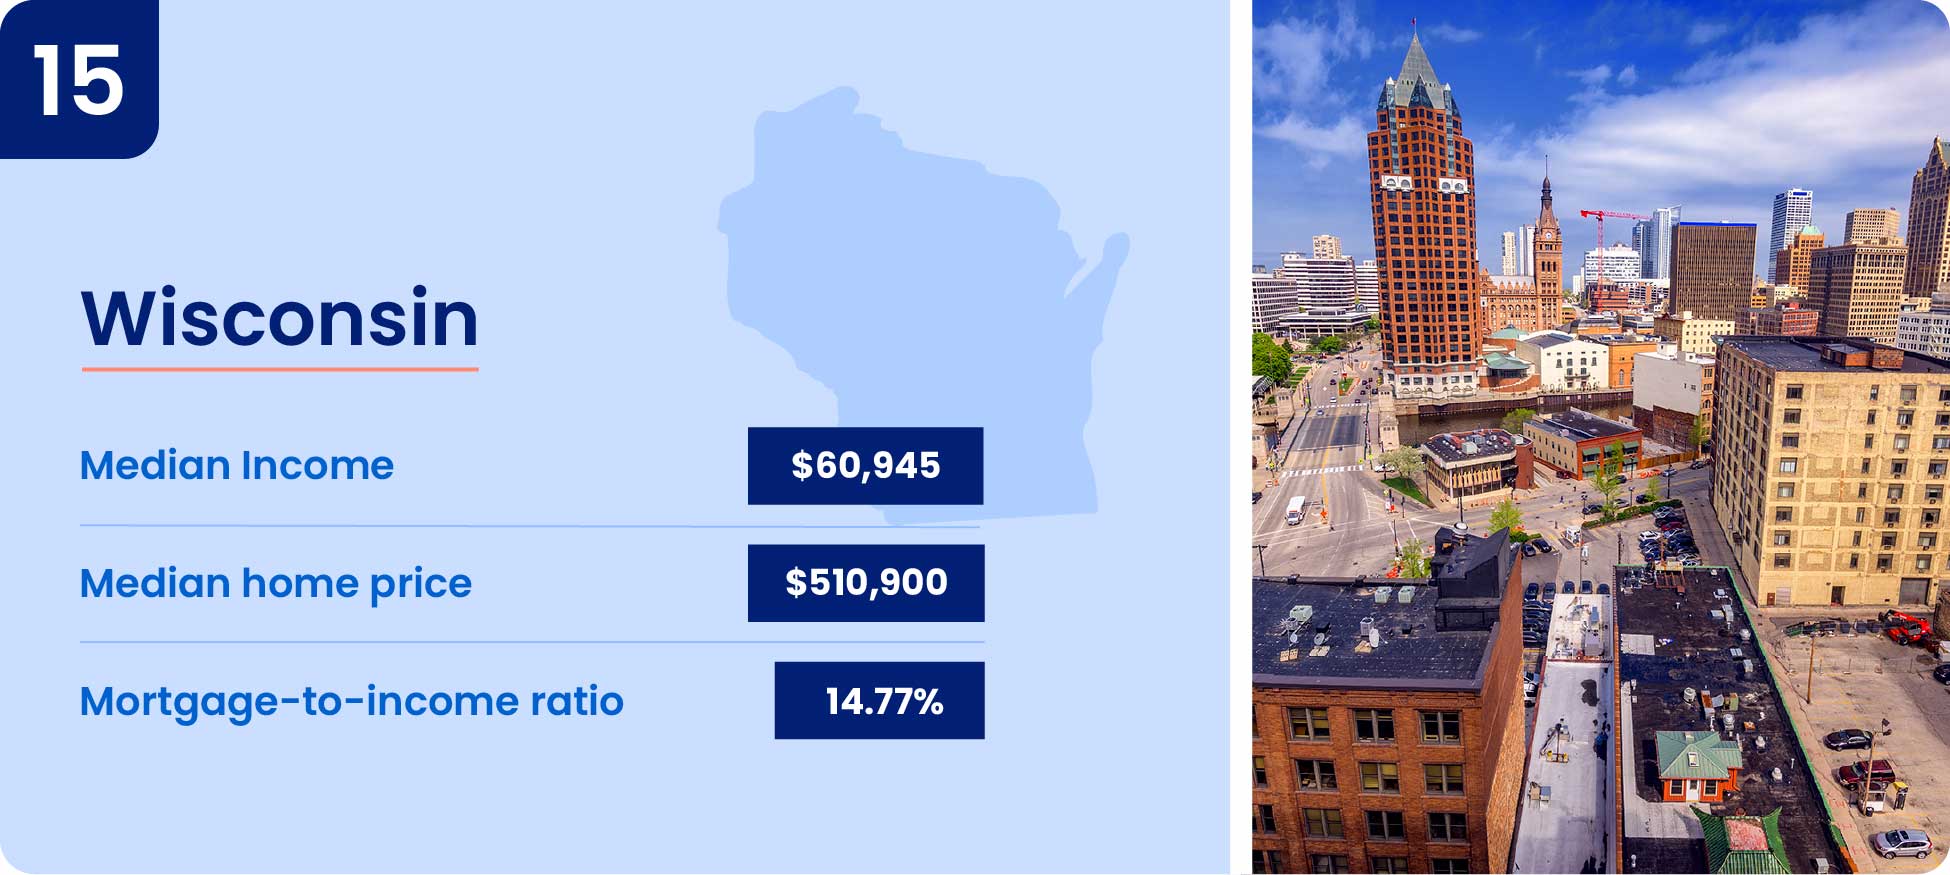 Image shows why one of the cheapest states to buy a house is Wisconsin.